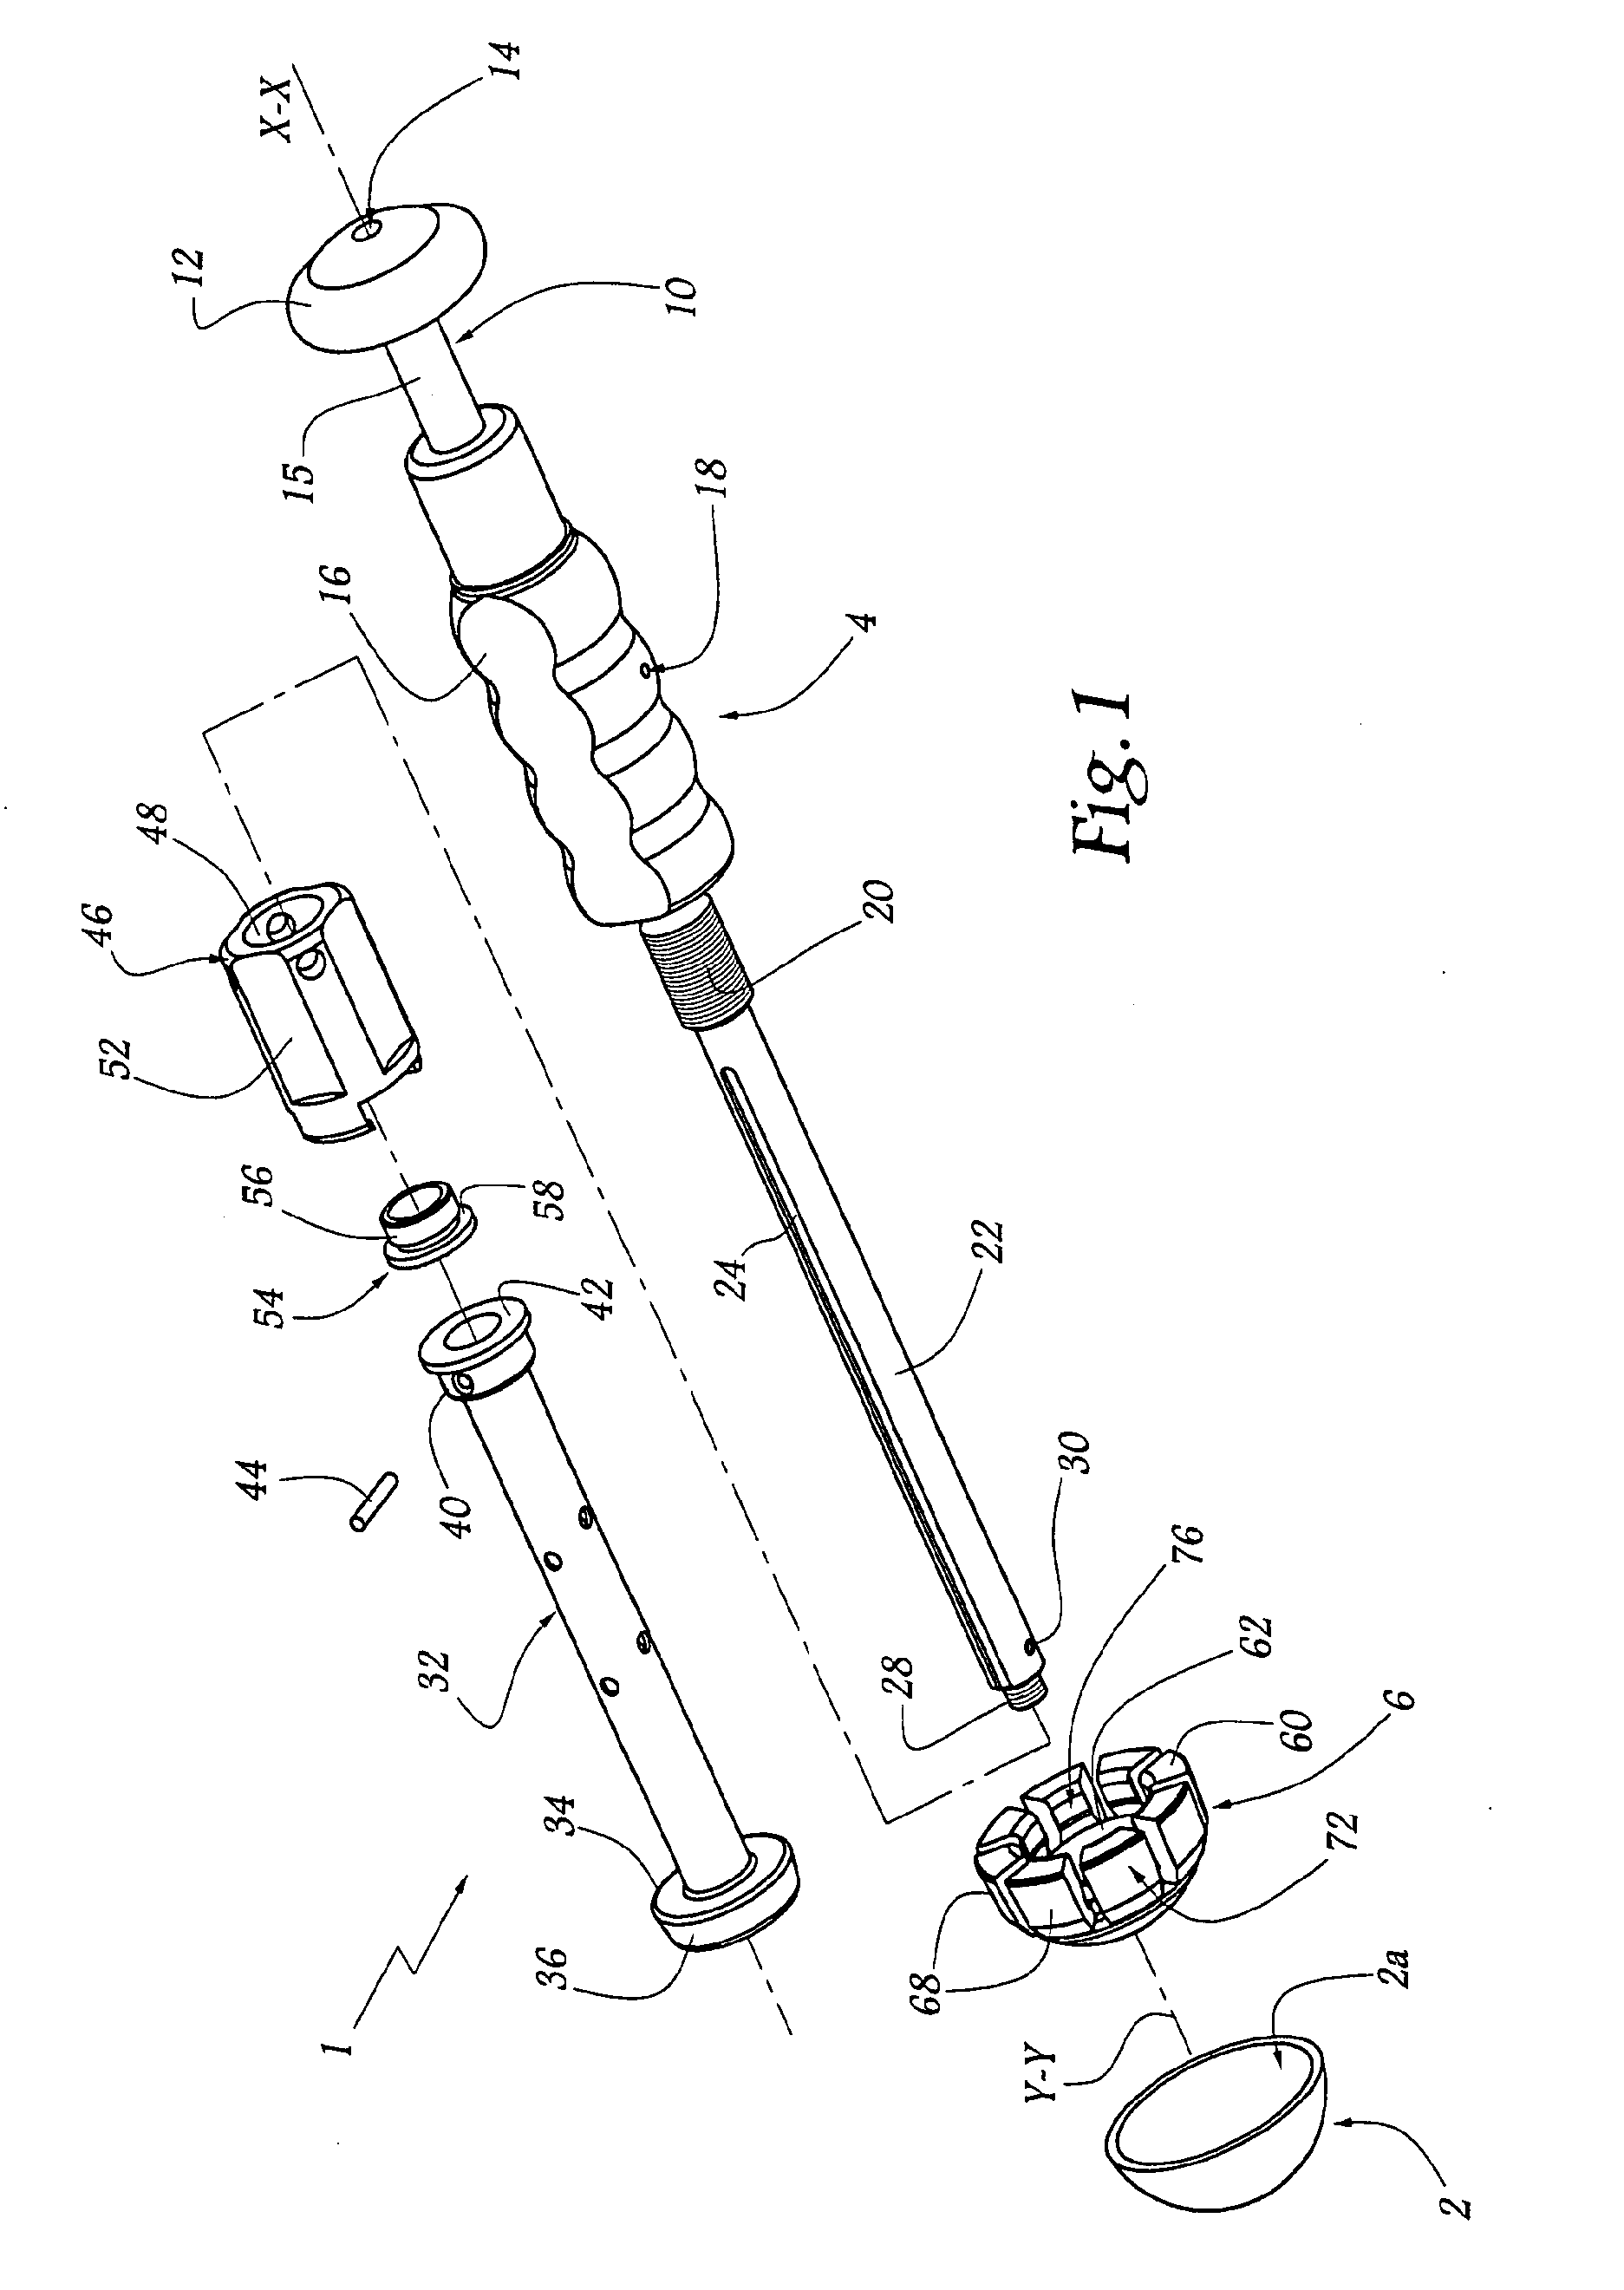 Ancillary tool and method for positioning a prosthetic acetabulum of a hip prosthesis